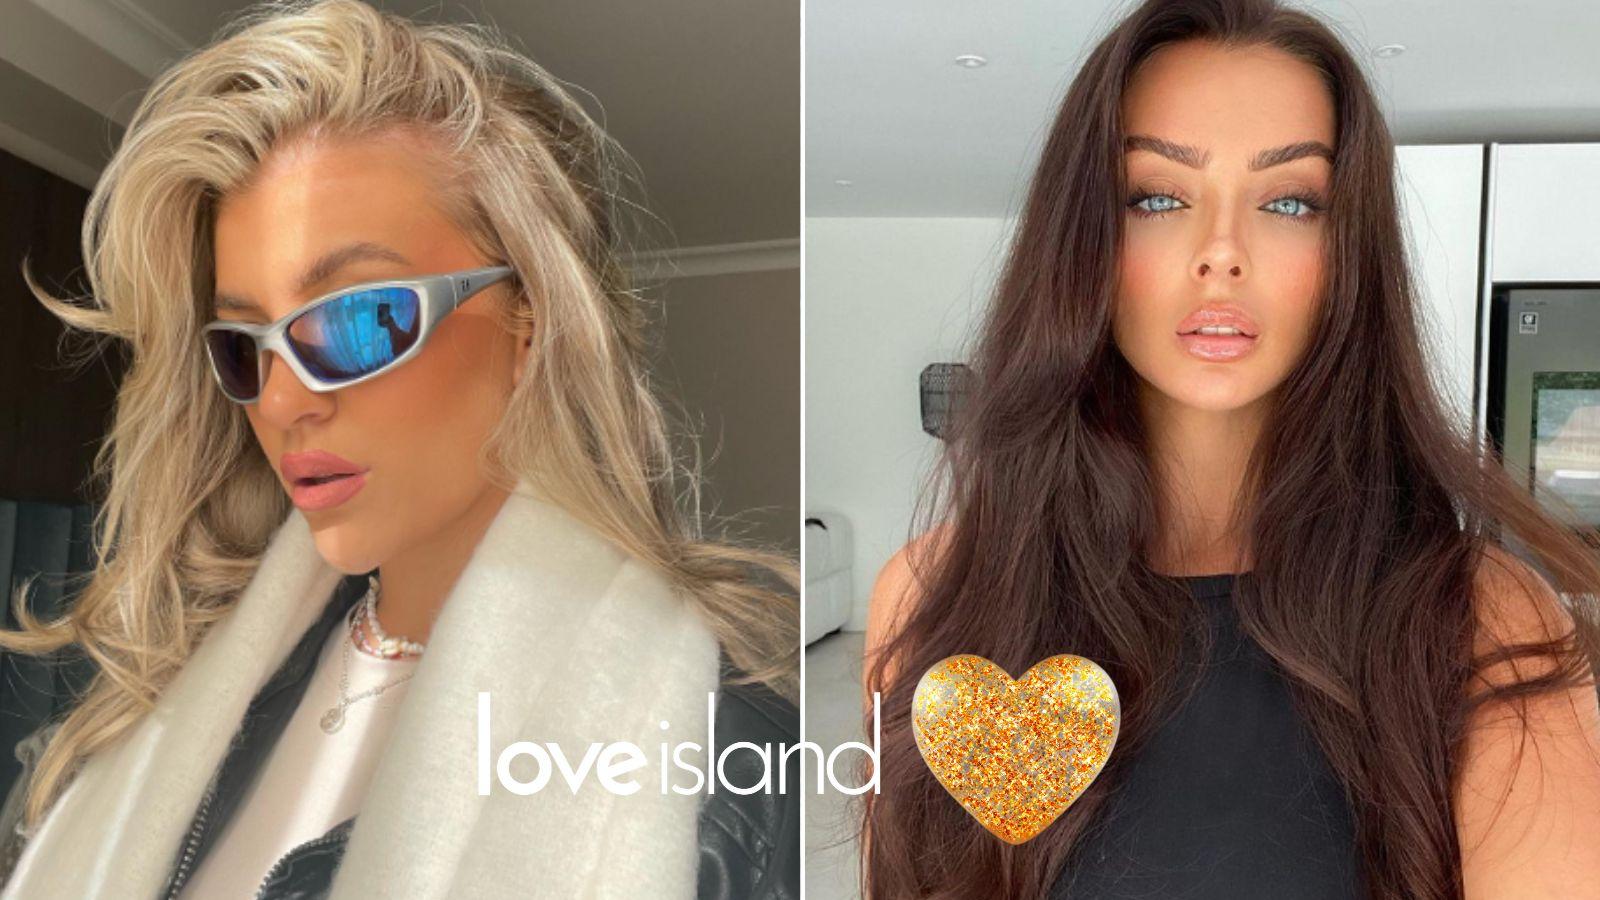 Molly and Kady from Love Island